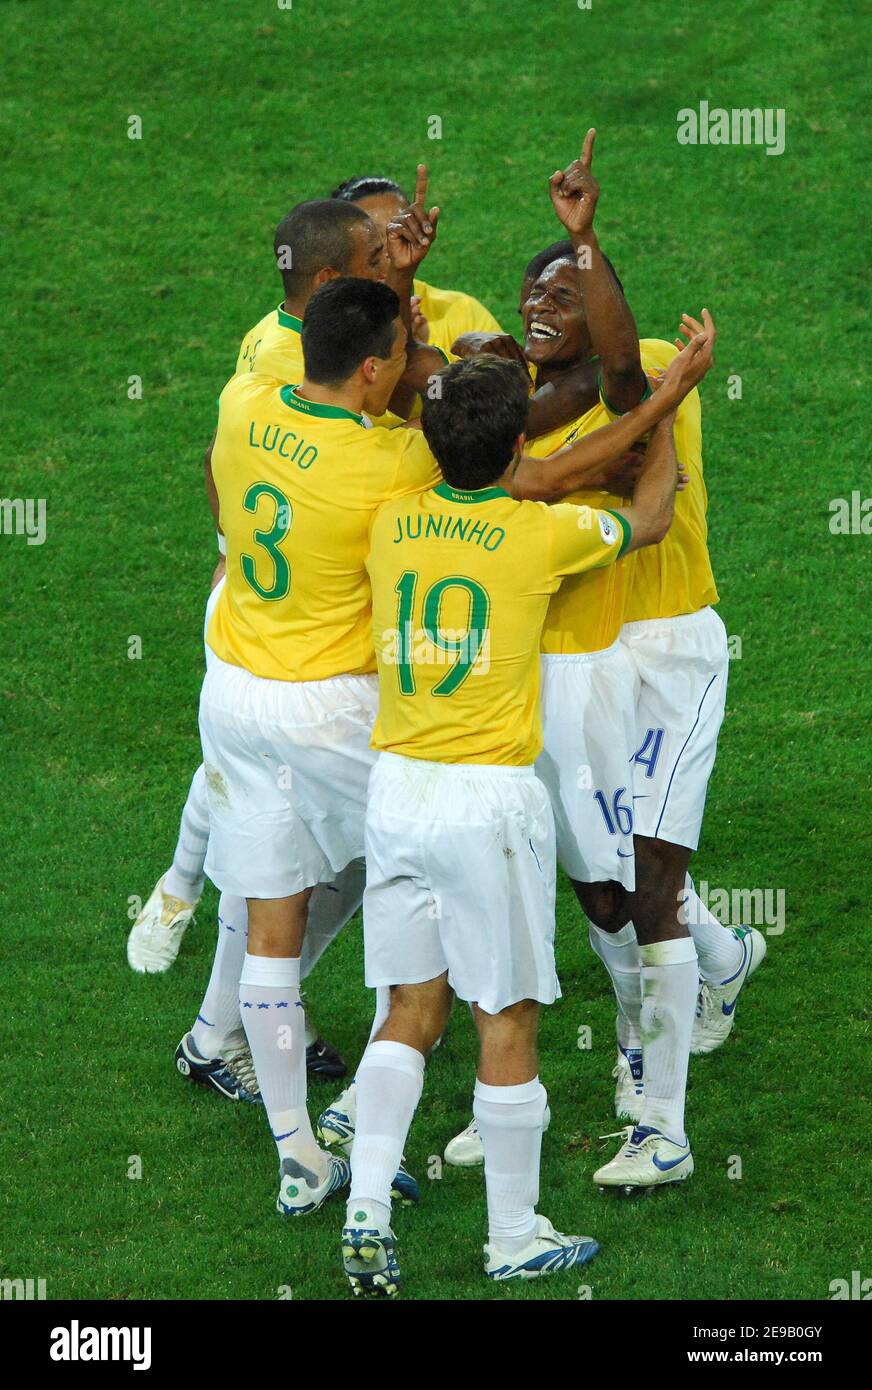 Brazil's soccer team celebrates after the first goal during the World Cup 2006, Group F, Japan vs Brazil at the Signal Iduna Park stadium in Dortmund, Germany 22, 2006. Brazil won 4-1. Photo by Gouhier-Hahn-Orban/Cameleon/ABACAPRESS.COM Stock Photo